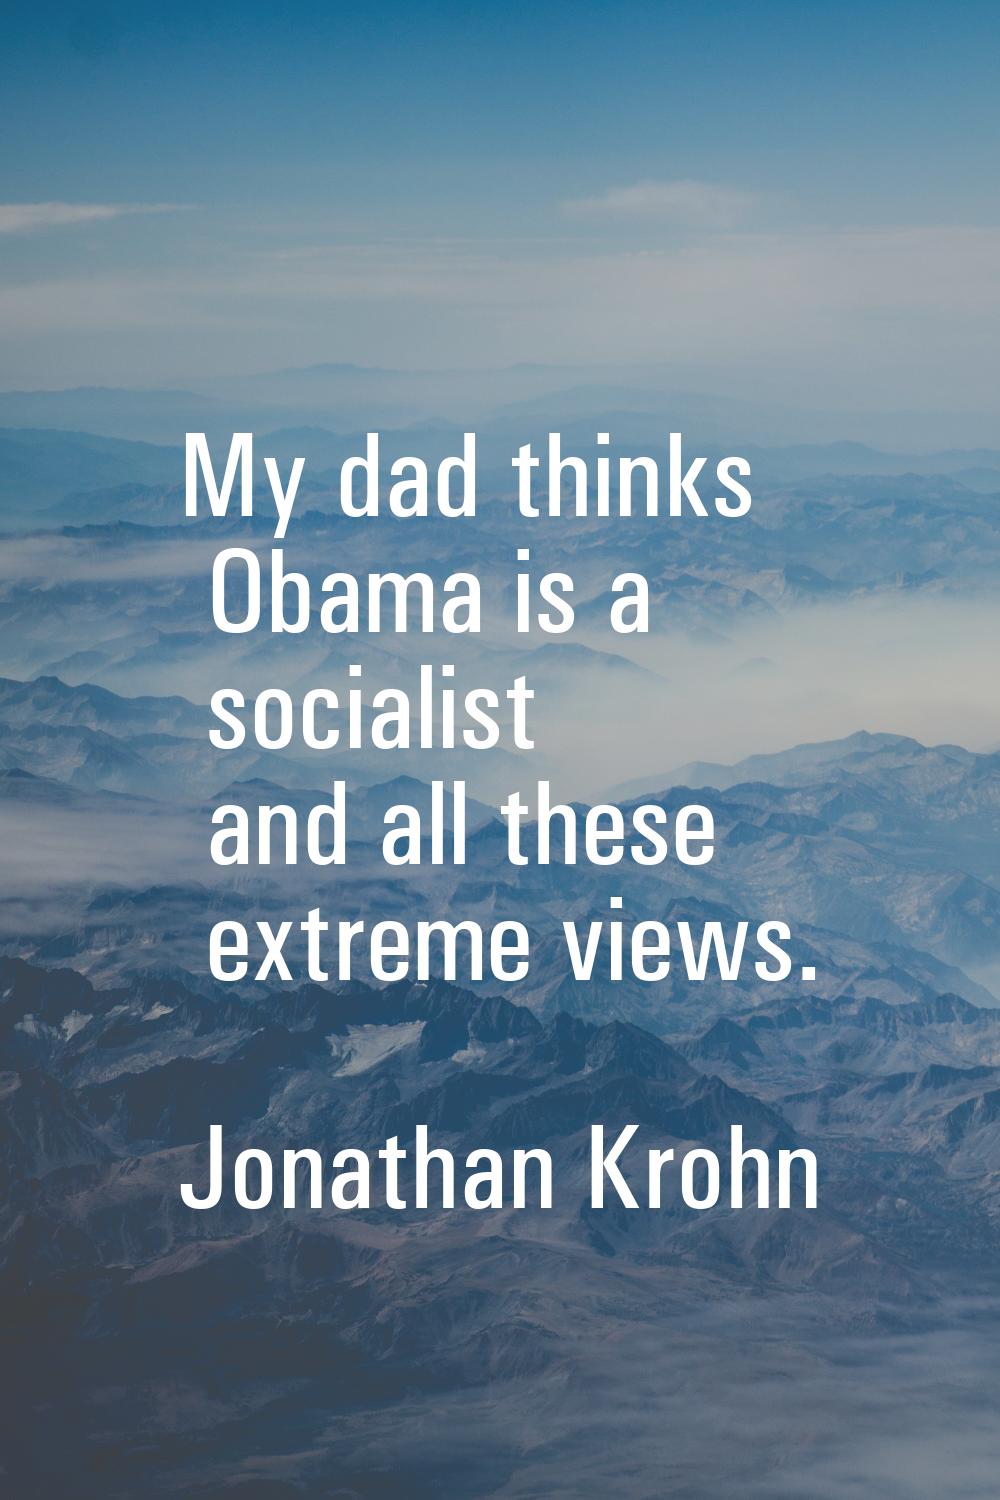 My dad thinks Obama is a socialist and all these extreme views.